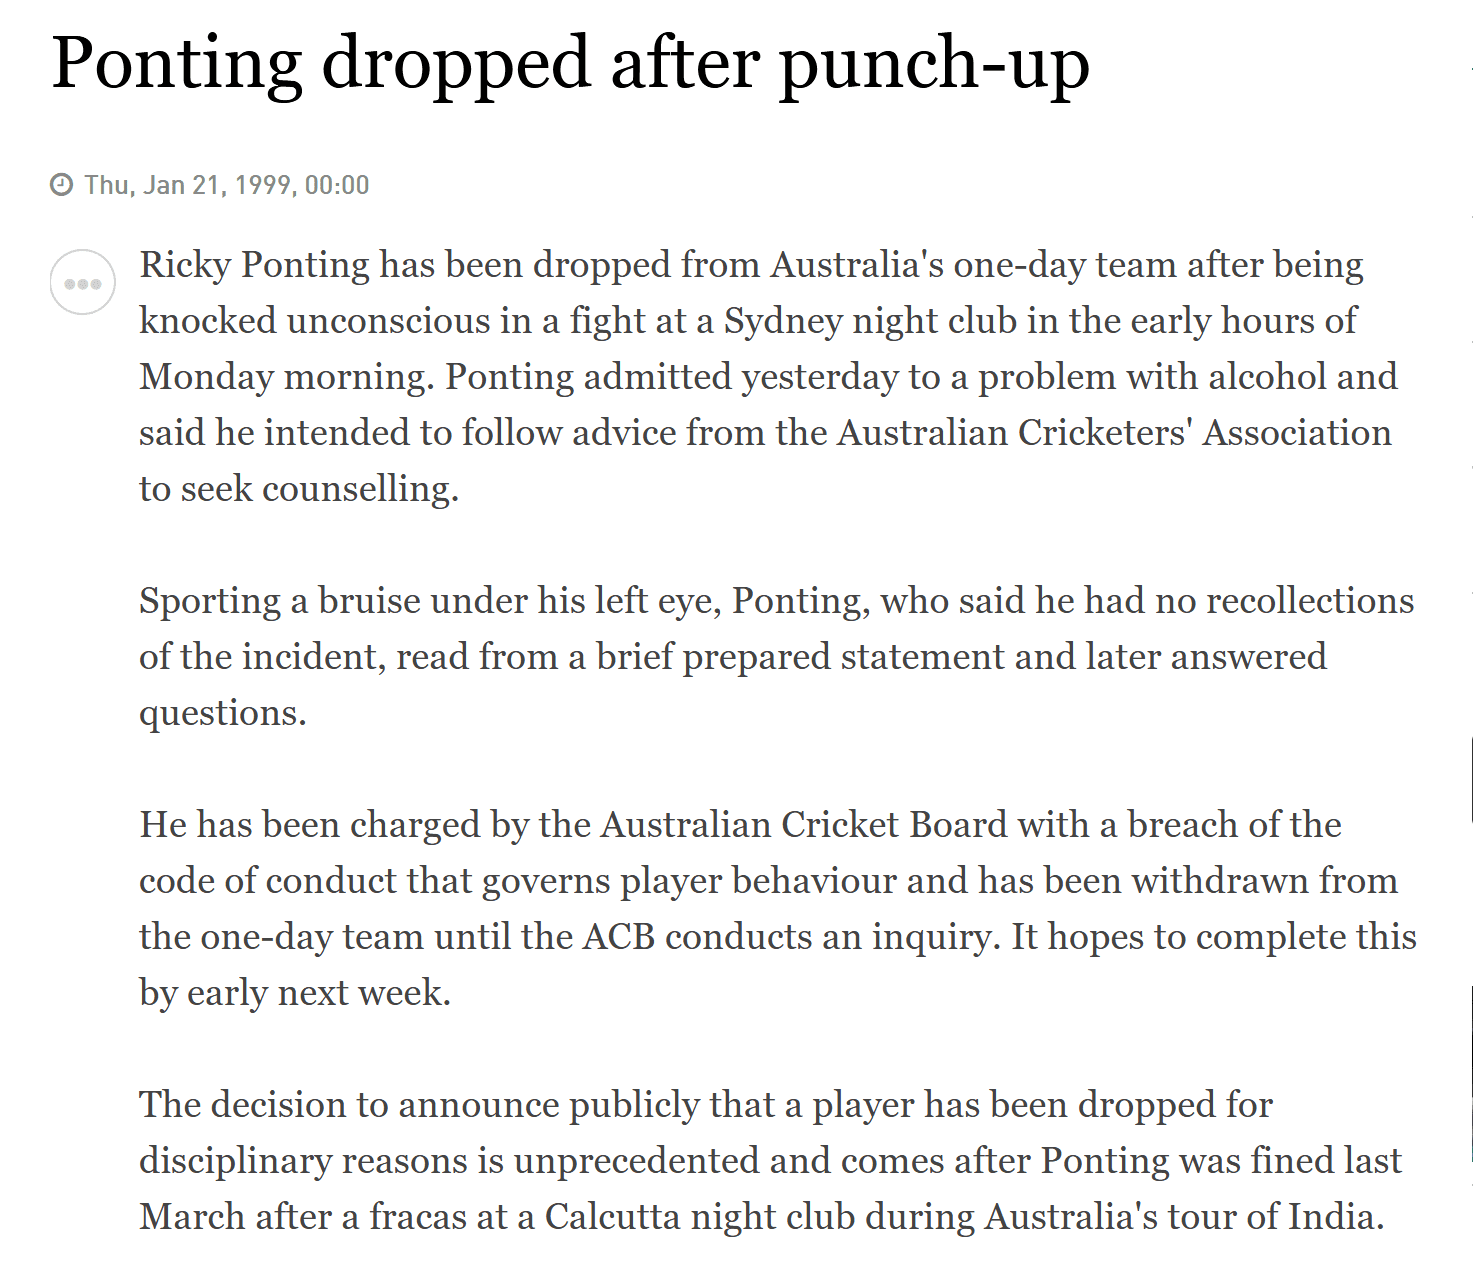 Screenshot 2021 01 18 Ponting dropped after punch up